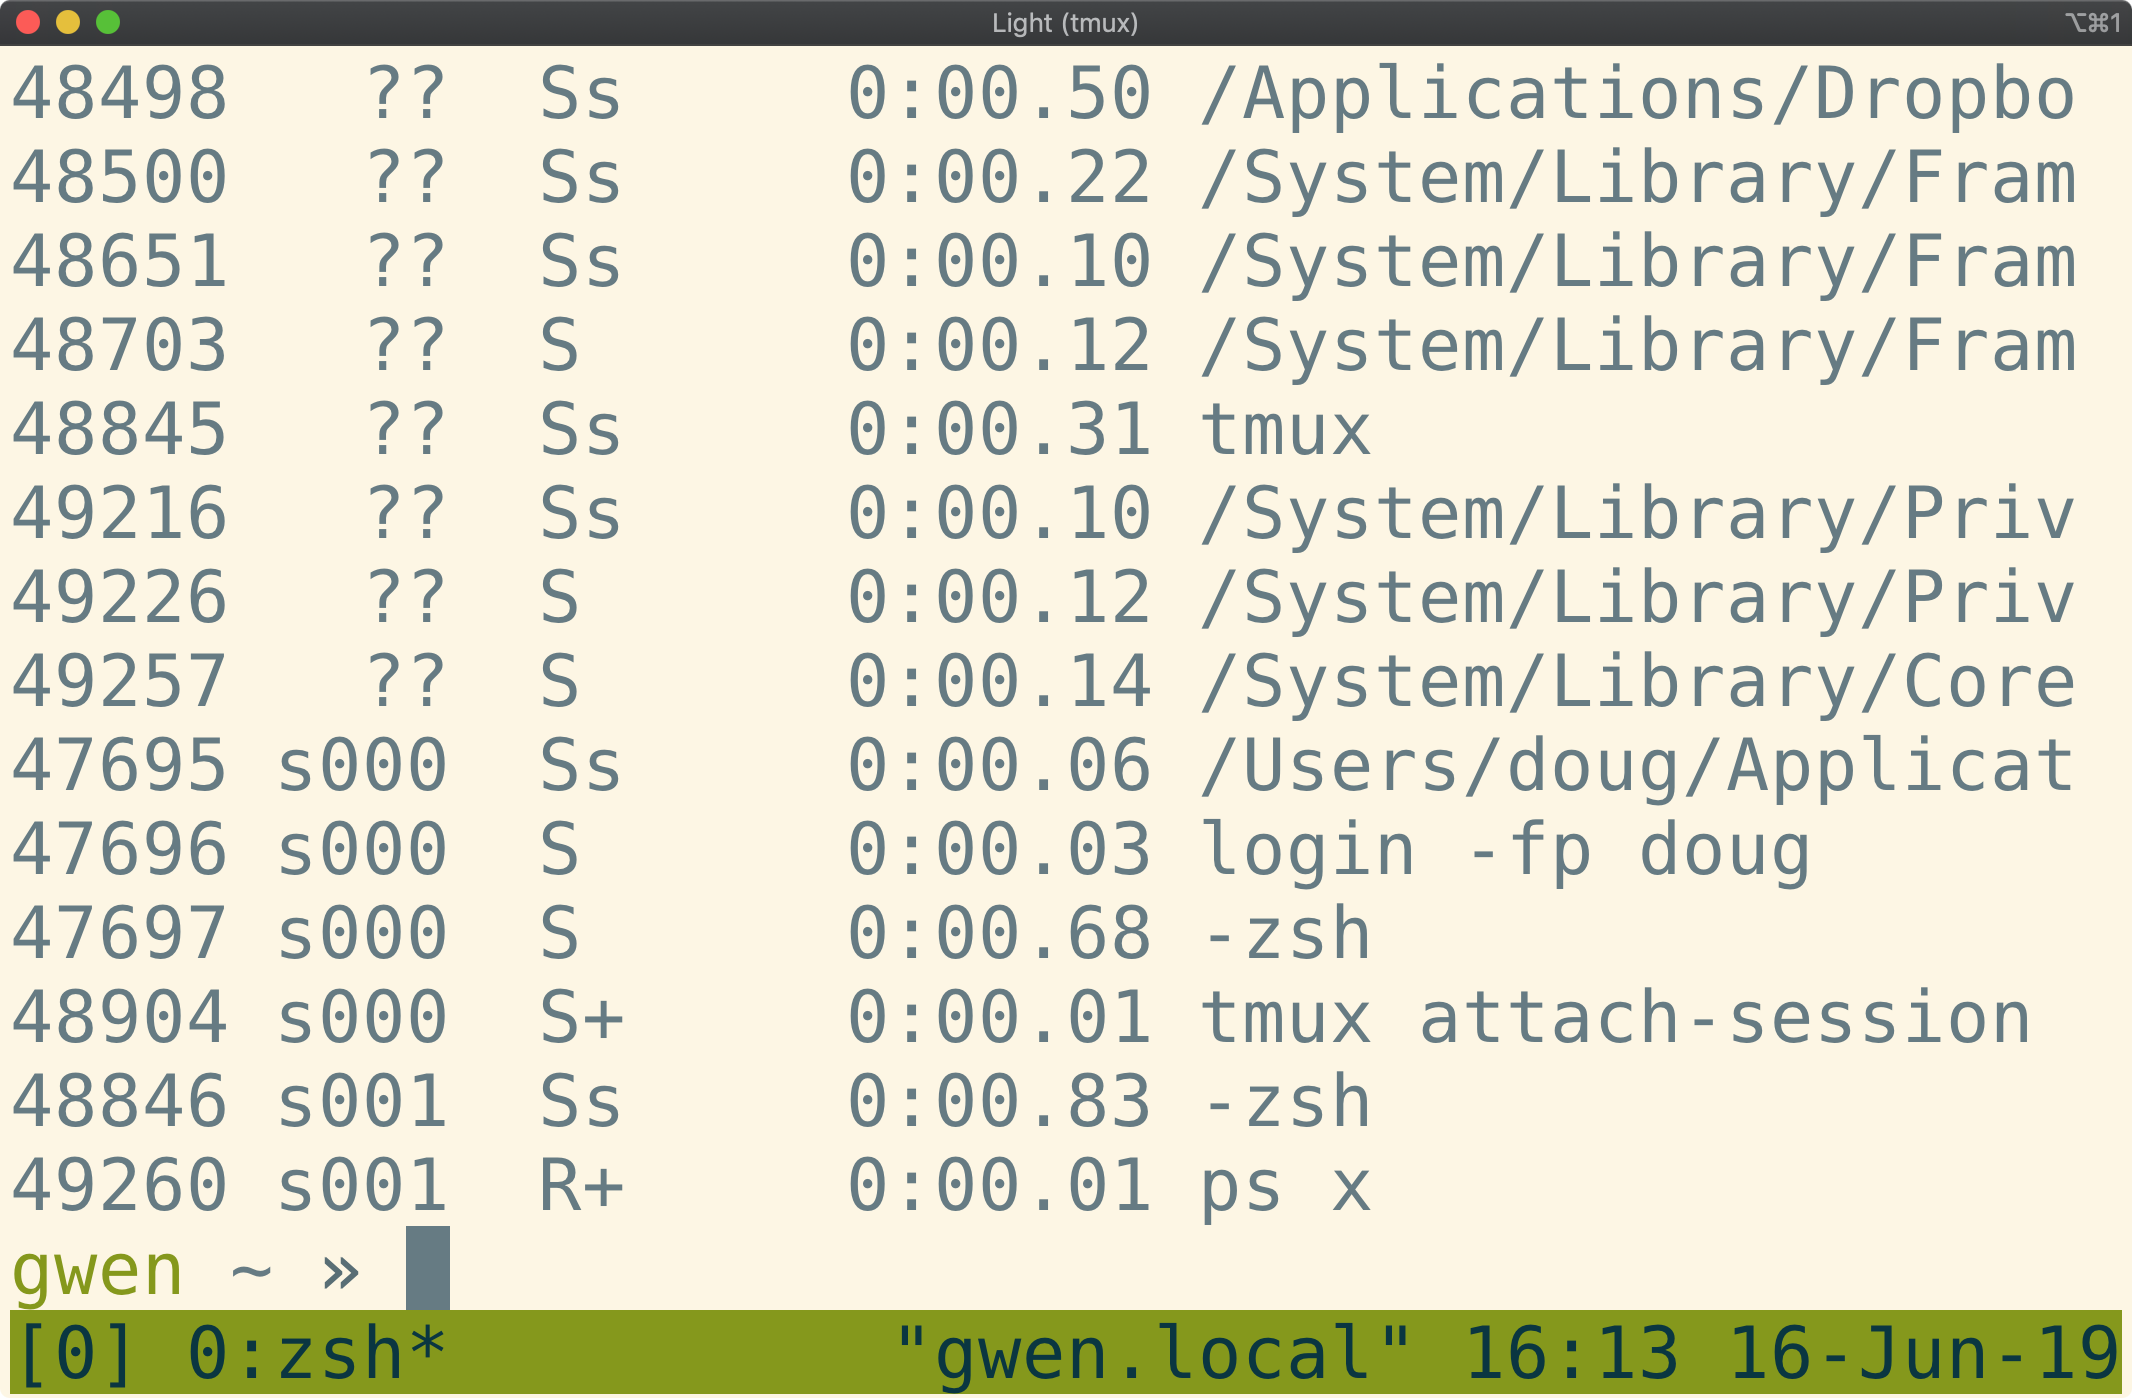 Tmux window showing the bottom of the output of "ps
au"